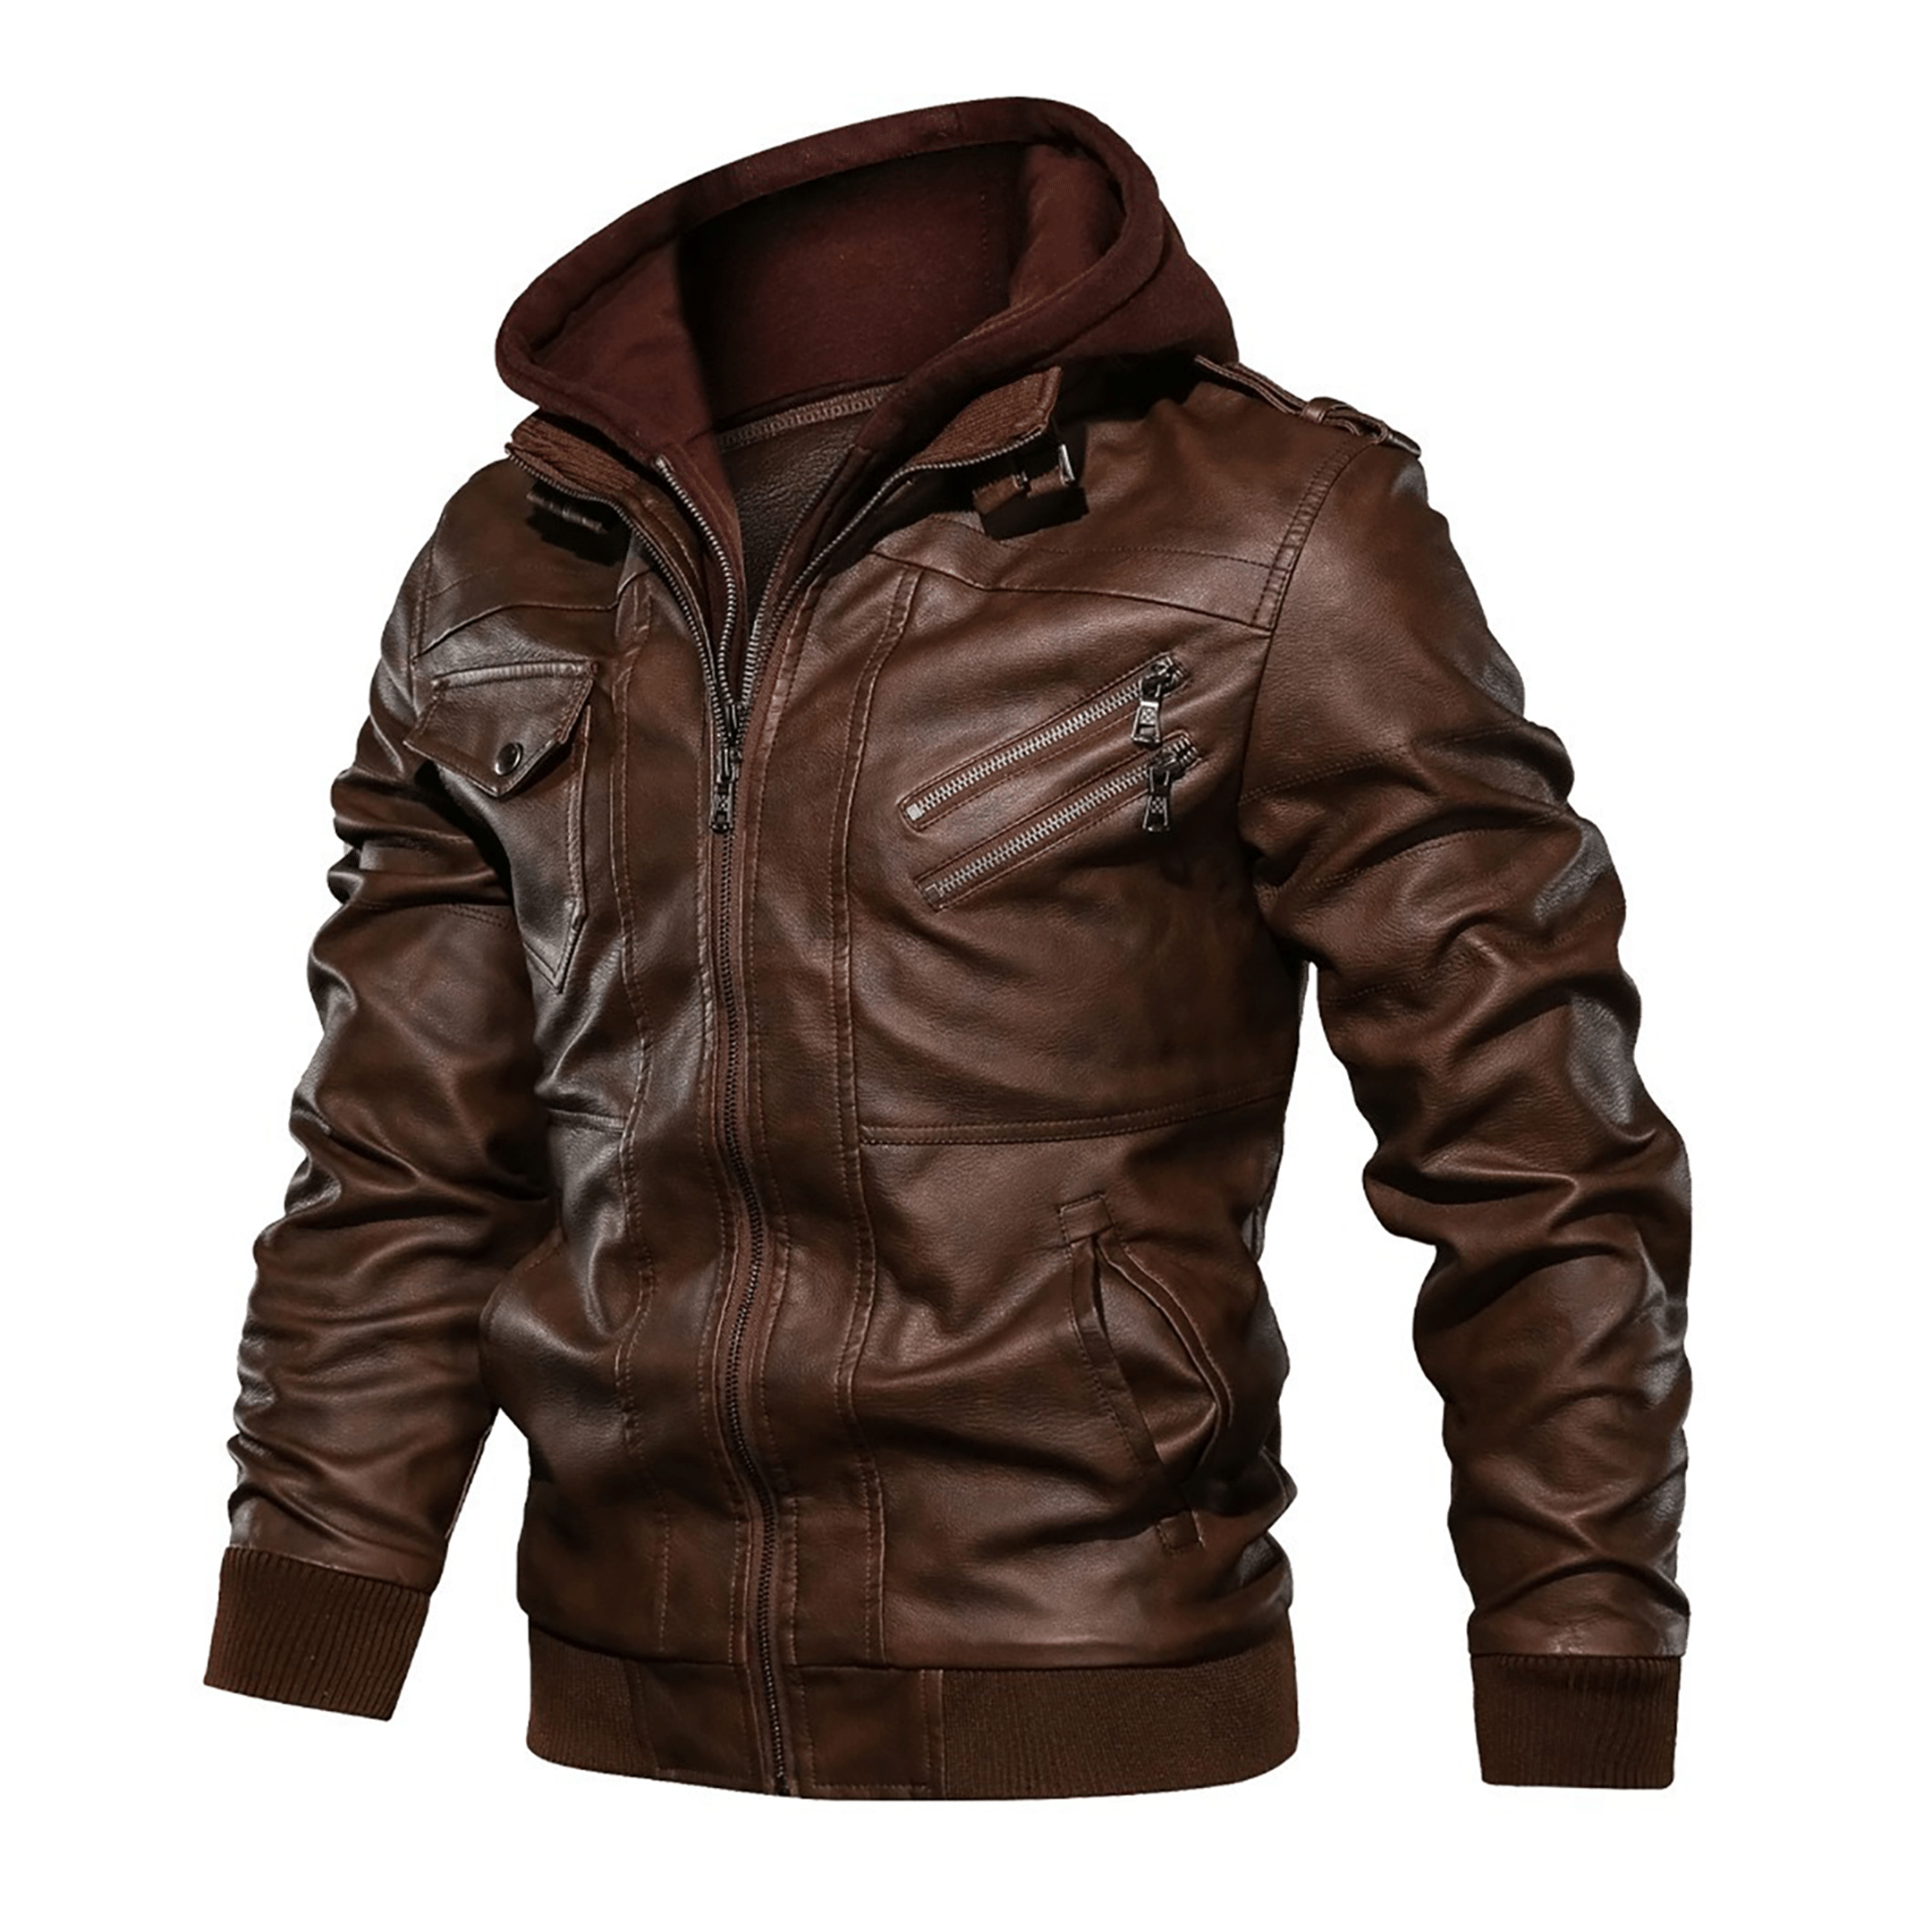 Top leather jackets and latest products 463